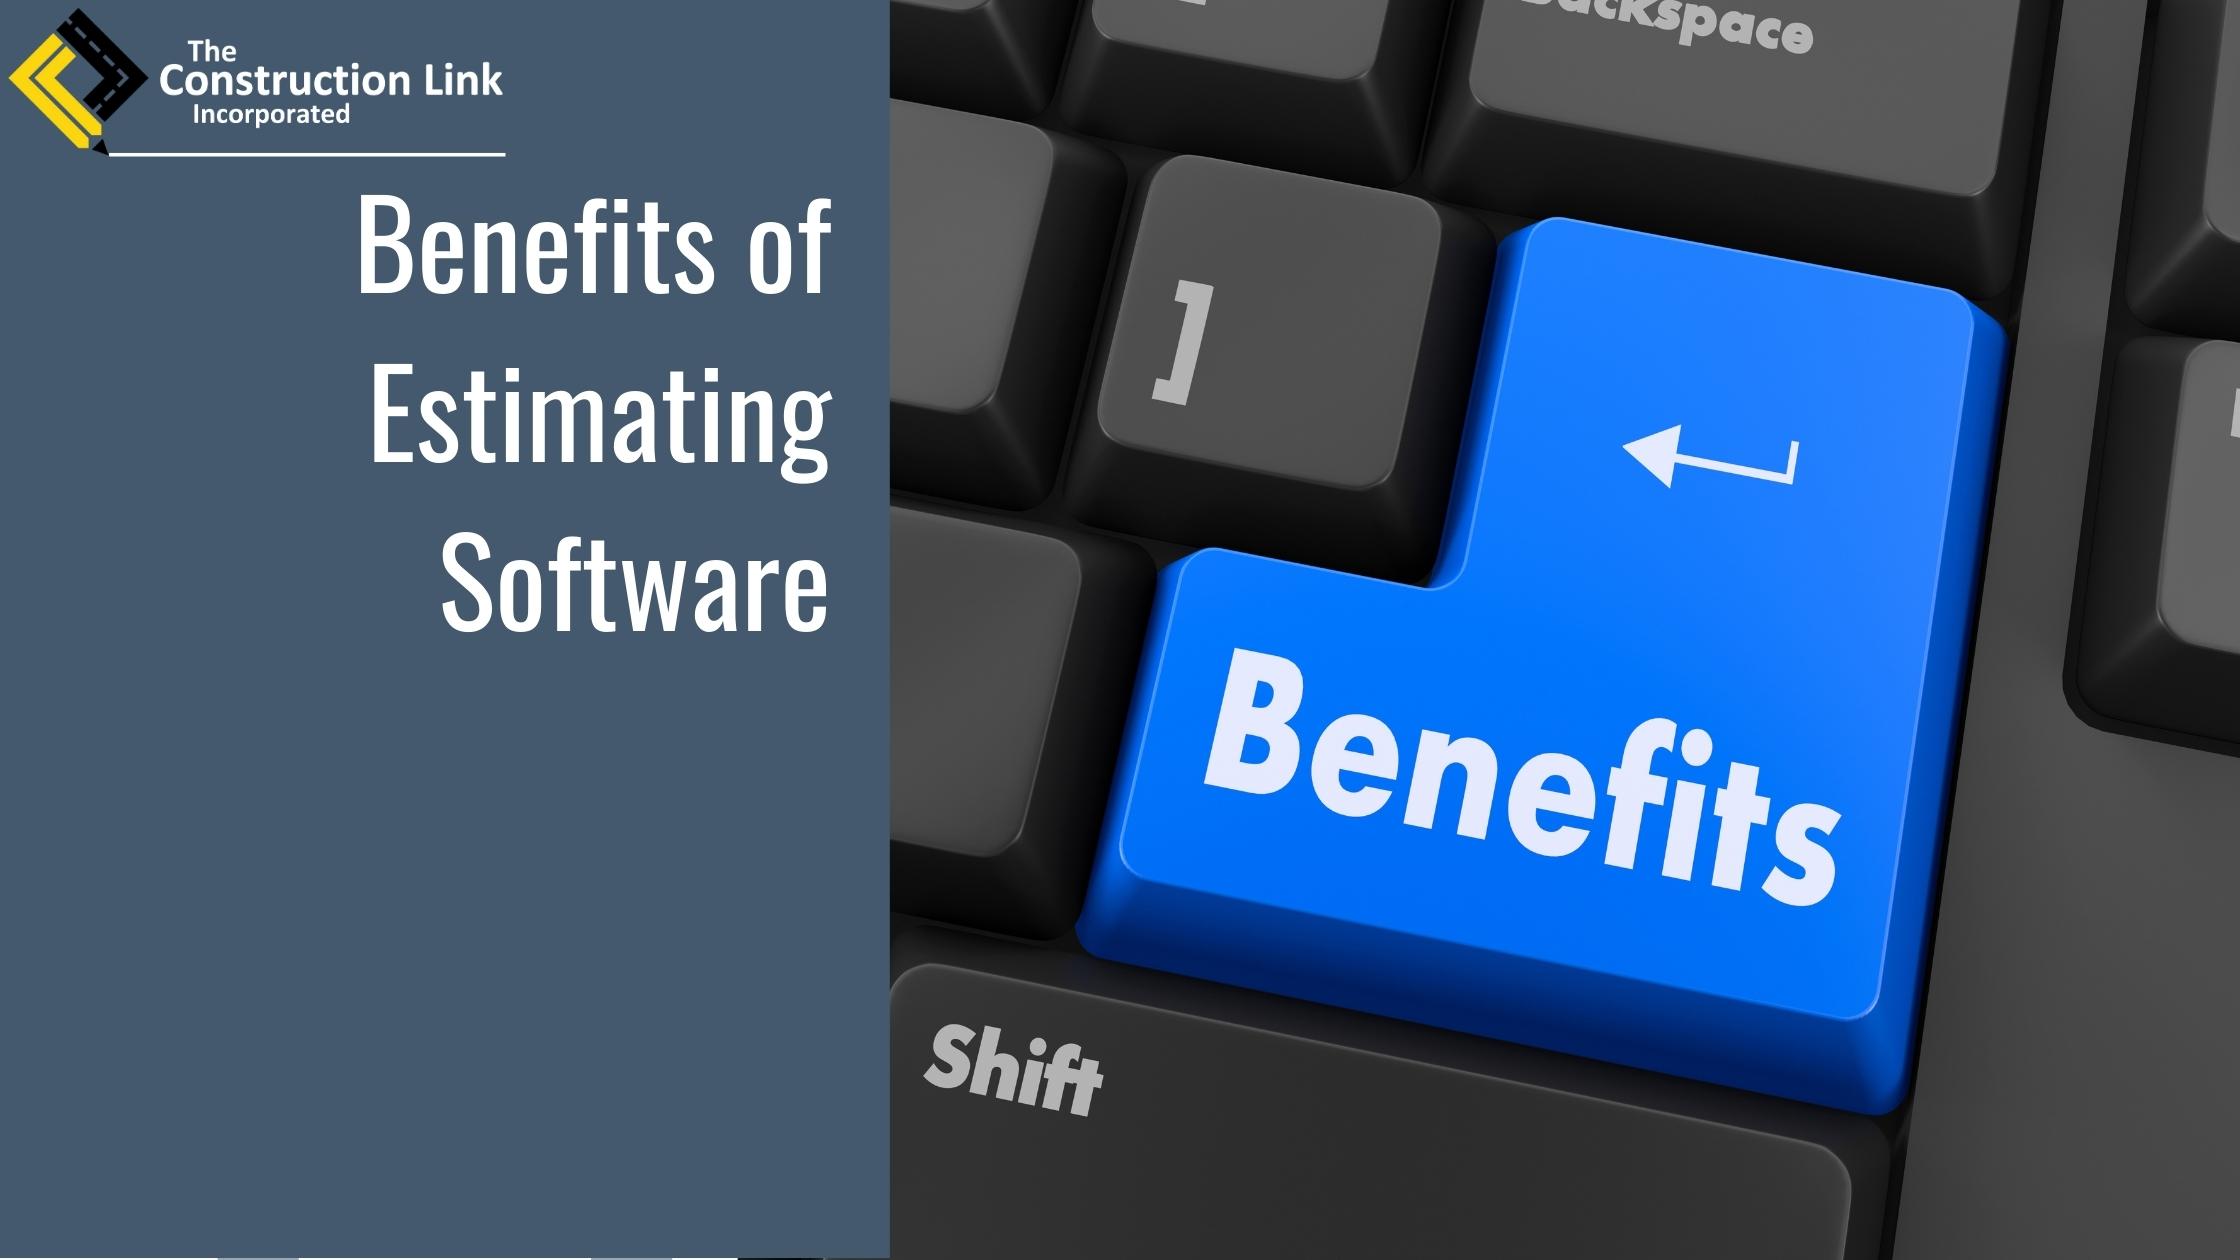 Benefits of Construction Estimating Software